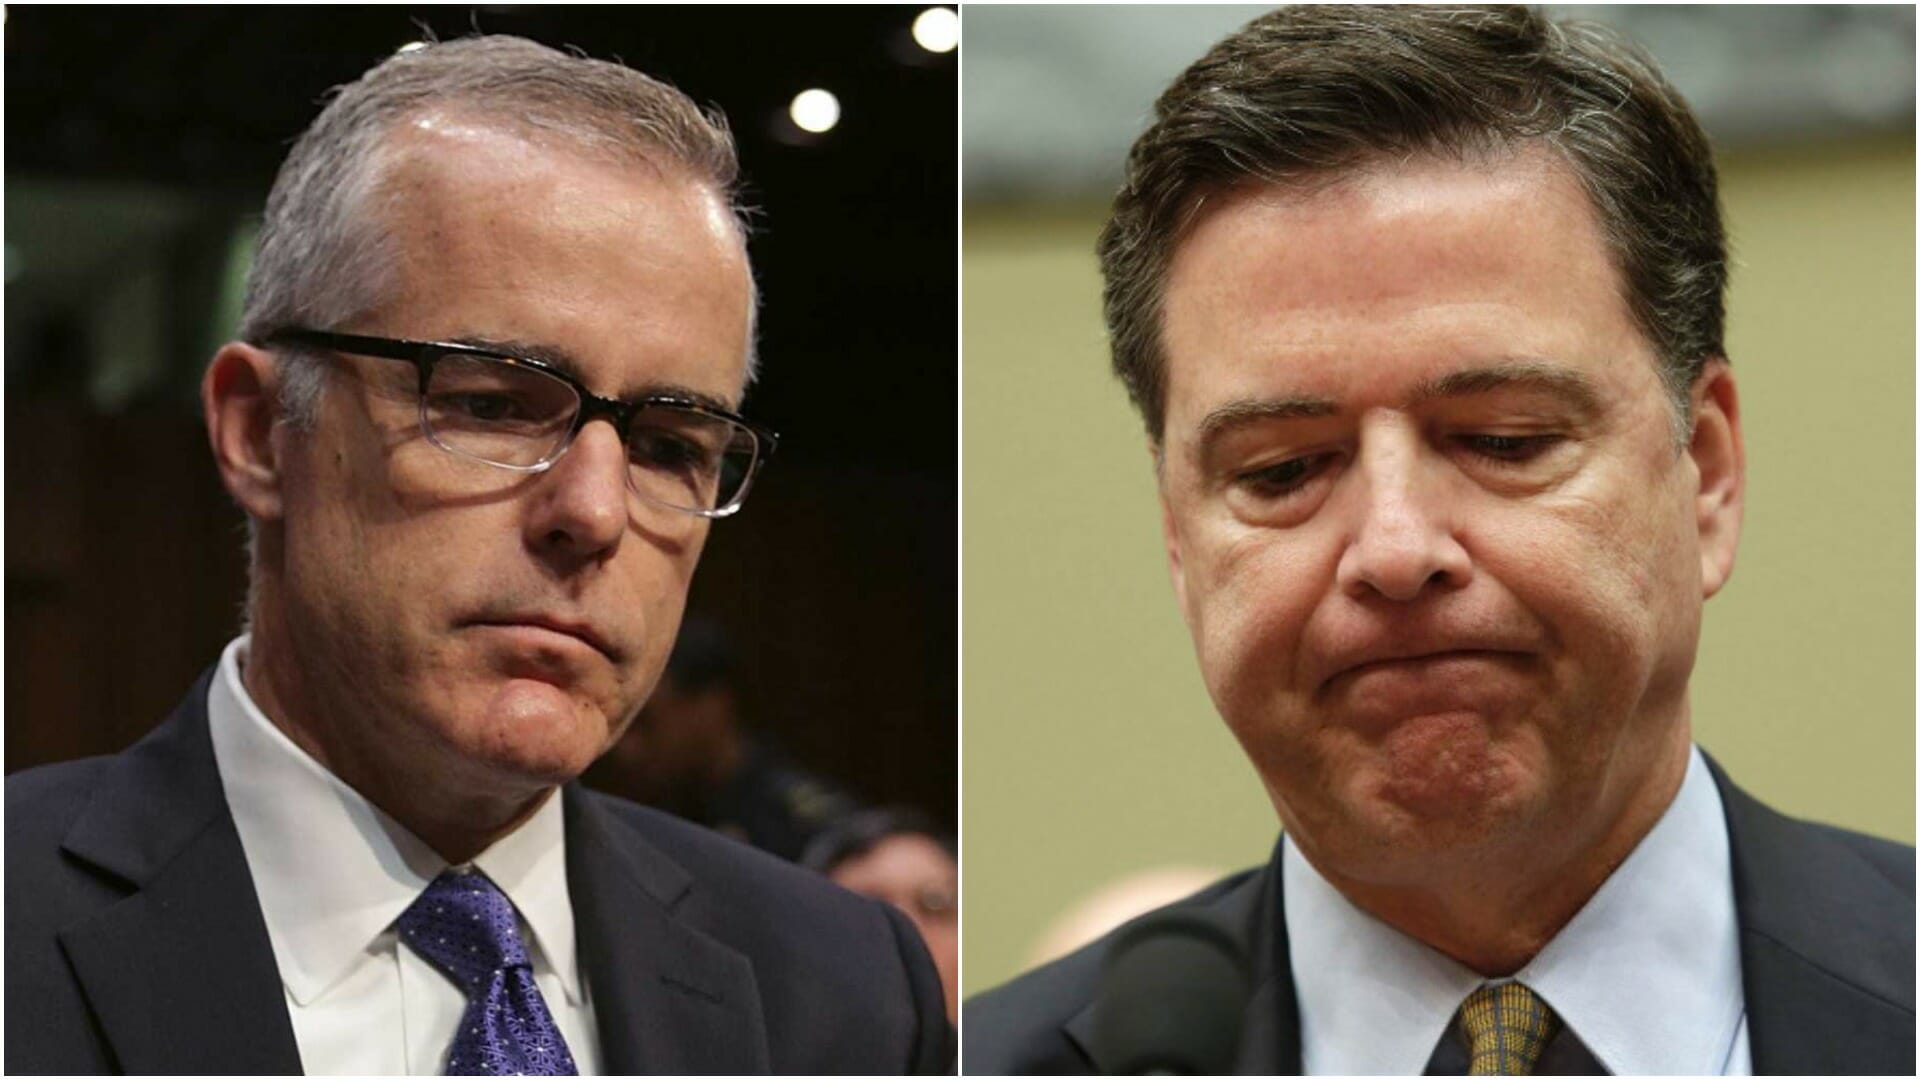 John Solomon: Keep an Eye on McCabe and Comey - Their Testimony Is Being Looked at Closely (VIDEO) | The Gateway Pundit | by Jim Hoft